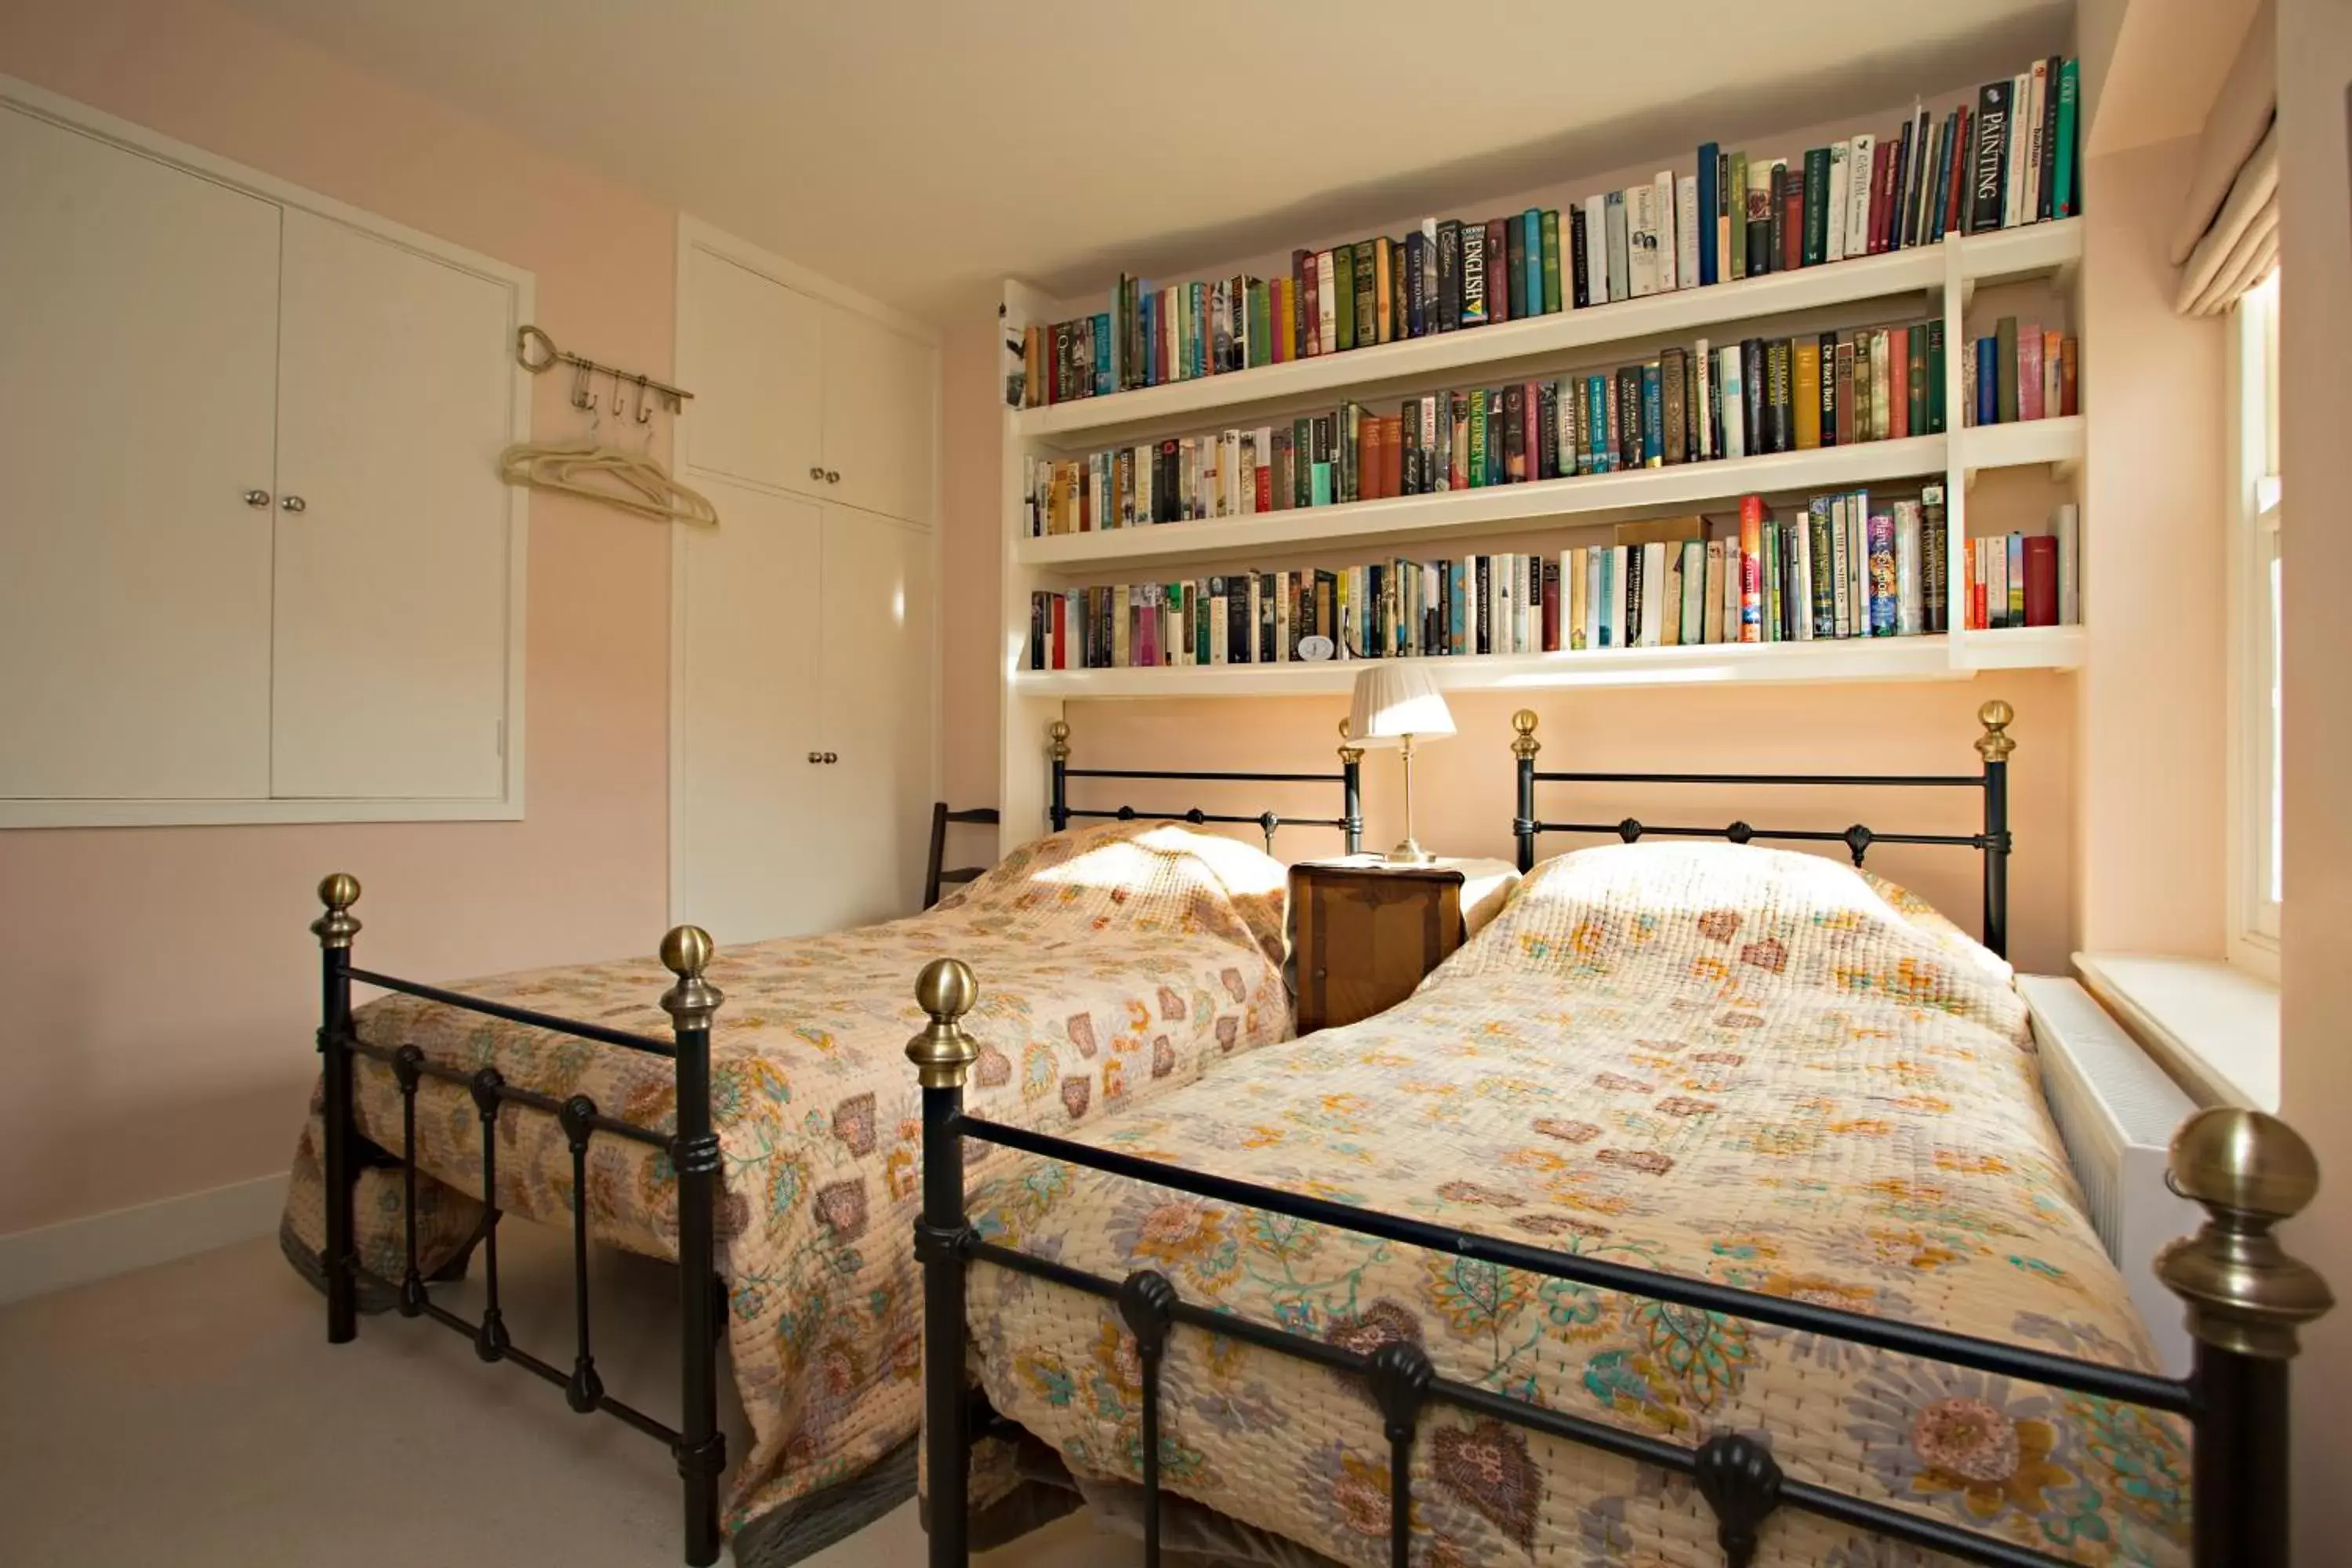 Bedroom, Library in Turks Hall